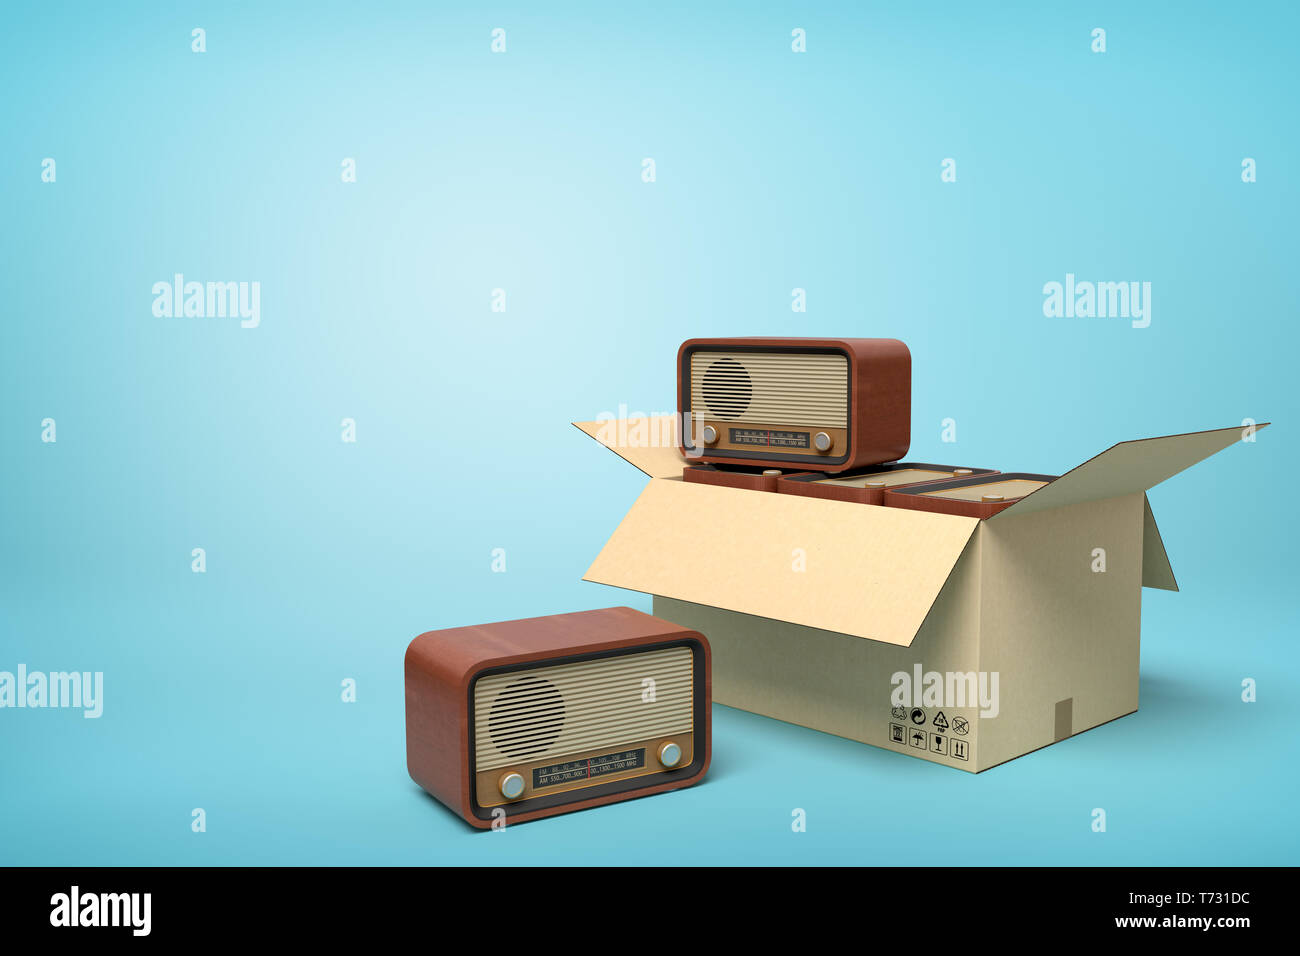 3d rendering of old-fashioned radios in carton box on blue background. Stock Photo